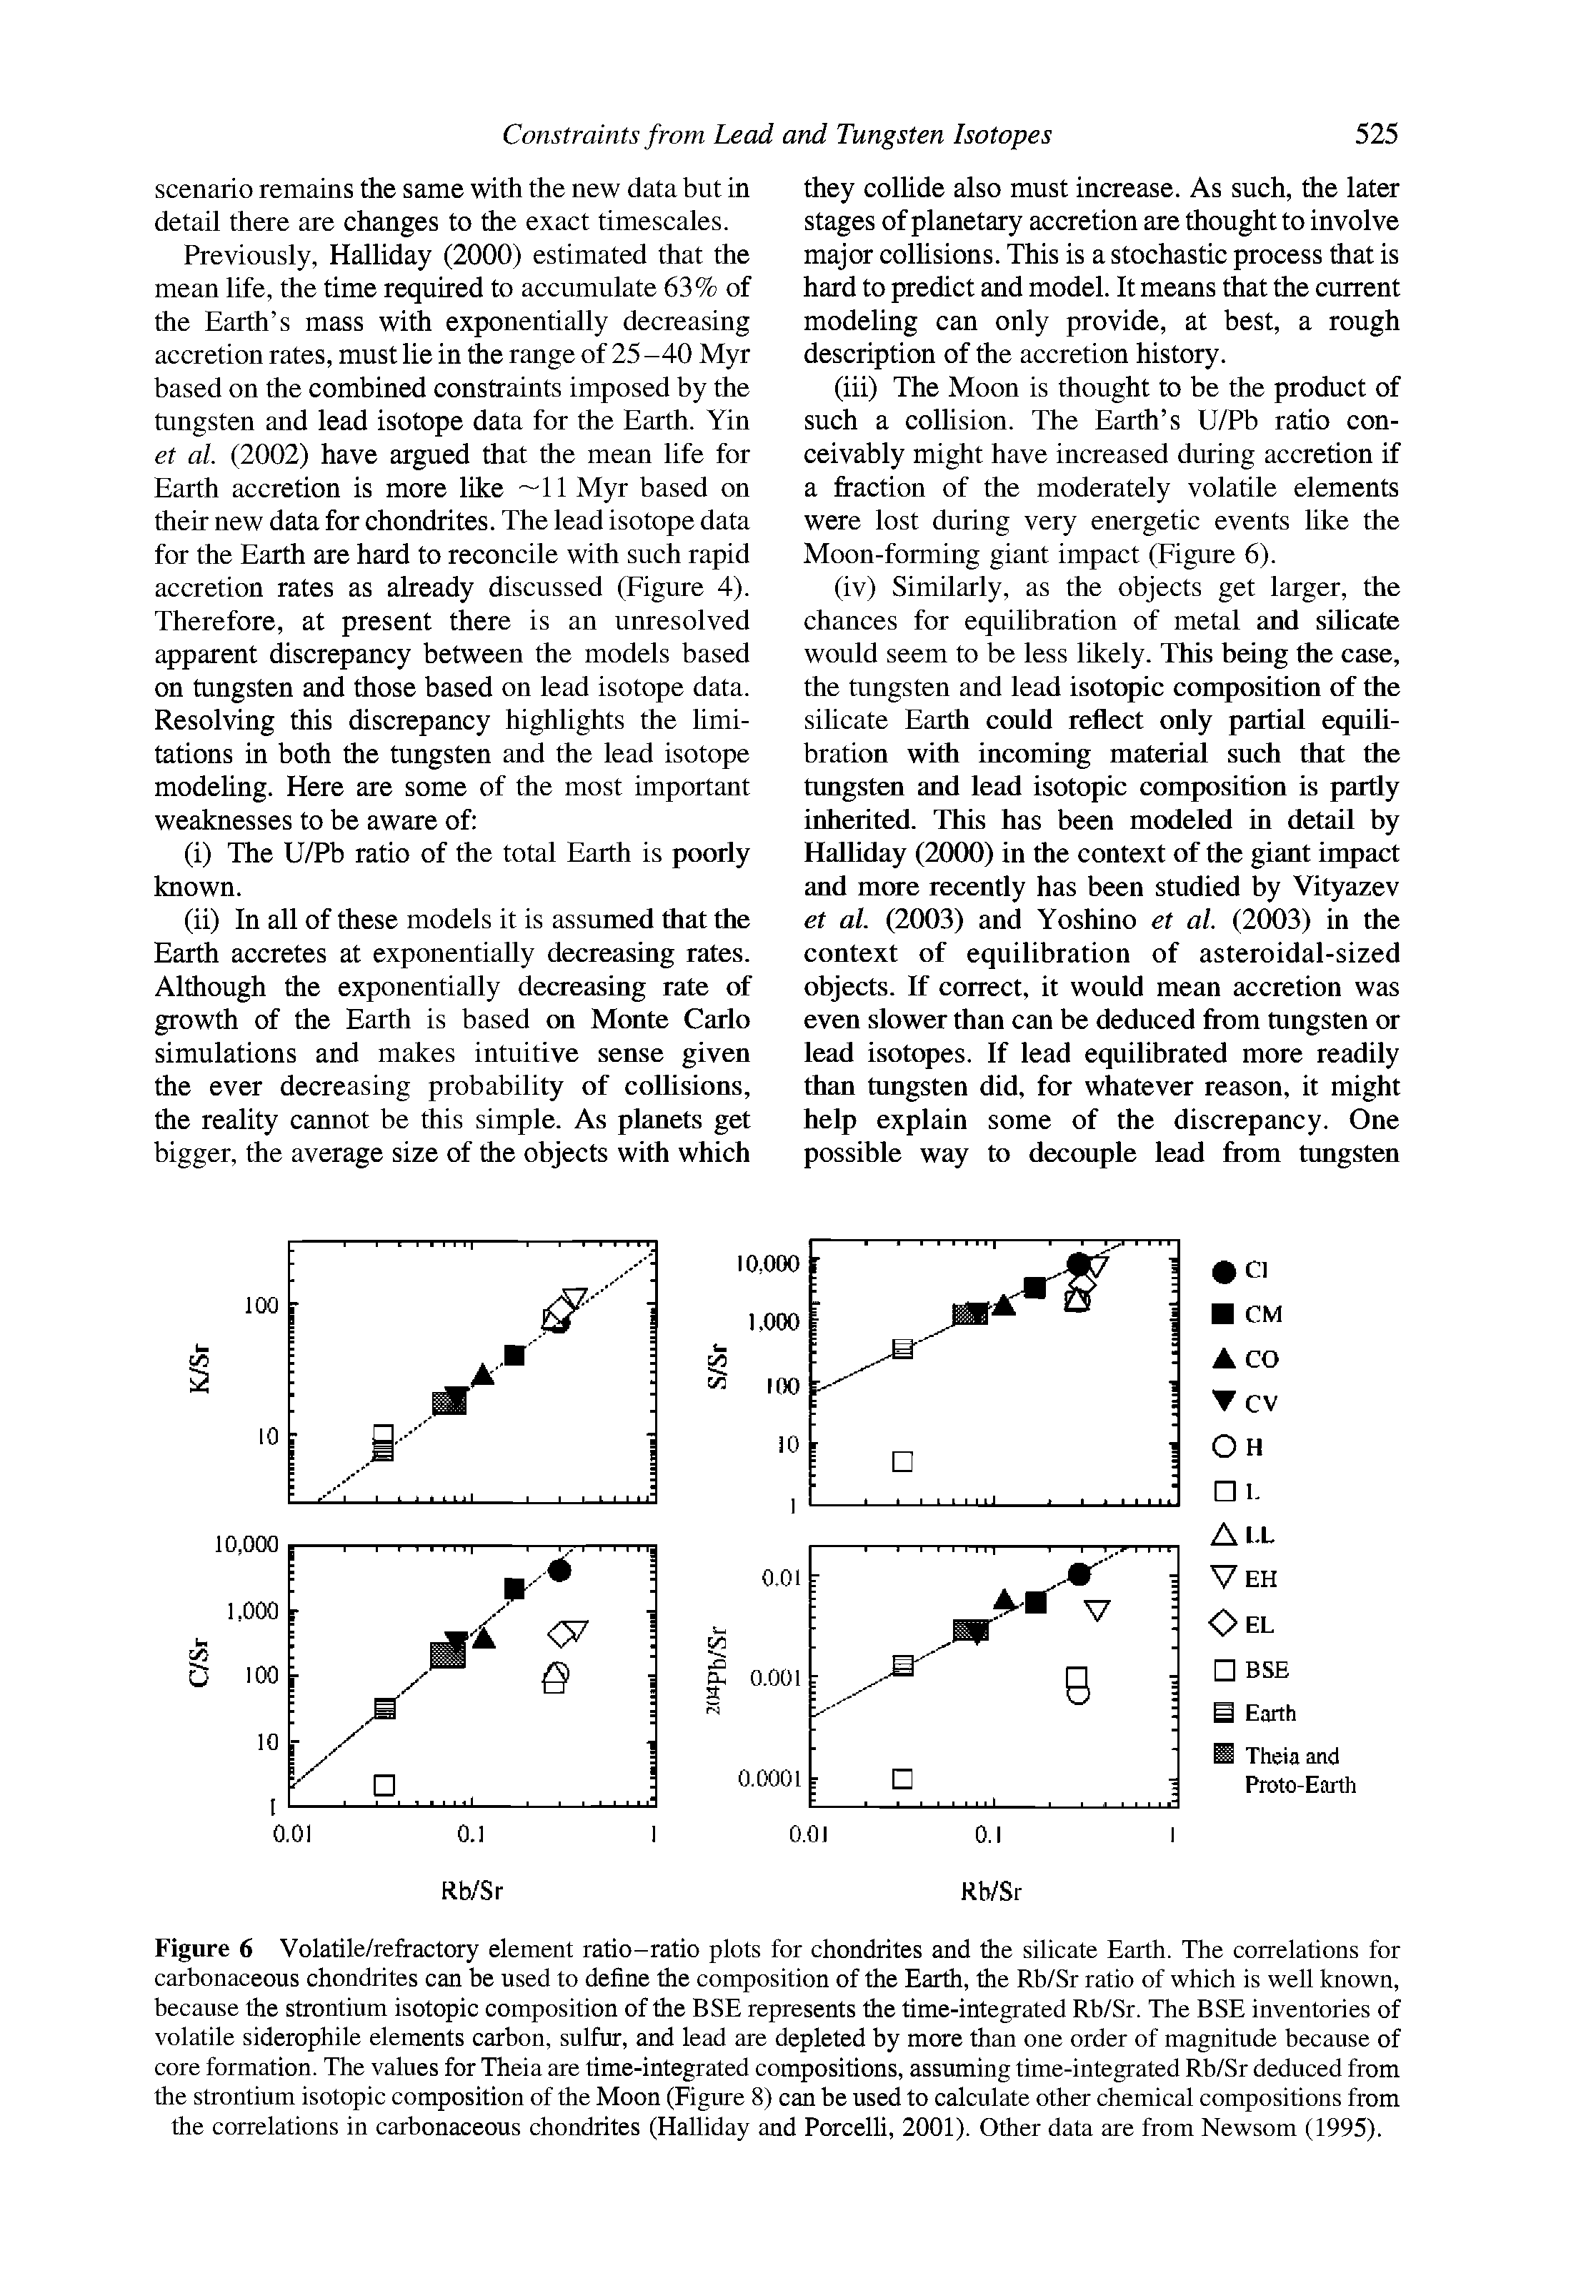 Figure 6 Volatile/refractory element ratio-ratio plots for chondrites and the silicate Earth. The correlations for carbonaceous chondrites can be used to define the composition of the Earth, the Rb/Sr ratio of which is well known, because the strontium isotopic composition of the BSE represents the time-integrated Rb/Sr. The BSE inventories of volatile siderophile elements carbon, sulfur, and lead are depleted by more than one order of magnitude because of core formation. The values for Theia are time-integrated compositions, assuming time-integrated Rb/Sr deduced from the strontium isotopic composition of the Moon (Figure 8) can be used to calculate other chemical compositions from the correlations in carbonaceous chondrites (Halliday and Porcelli, 2001). Other data are from Newsom (1995).